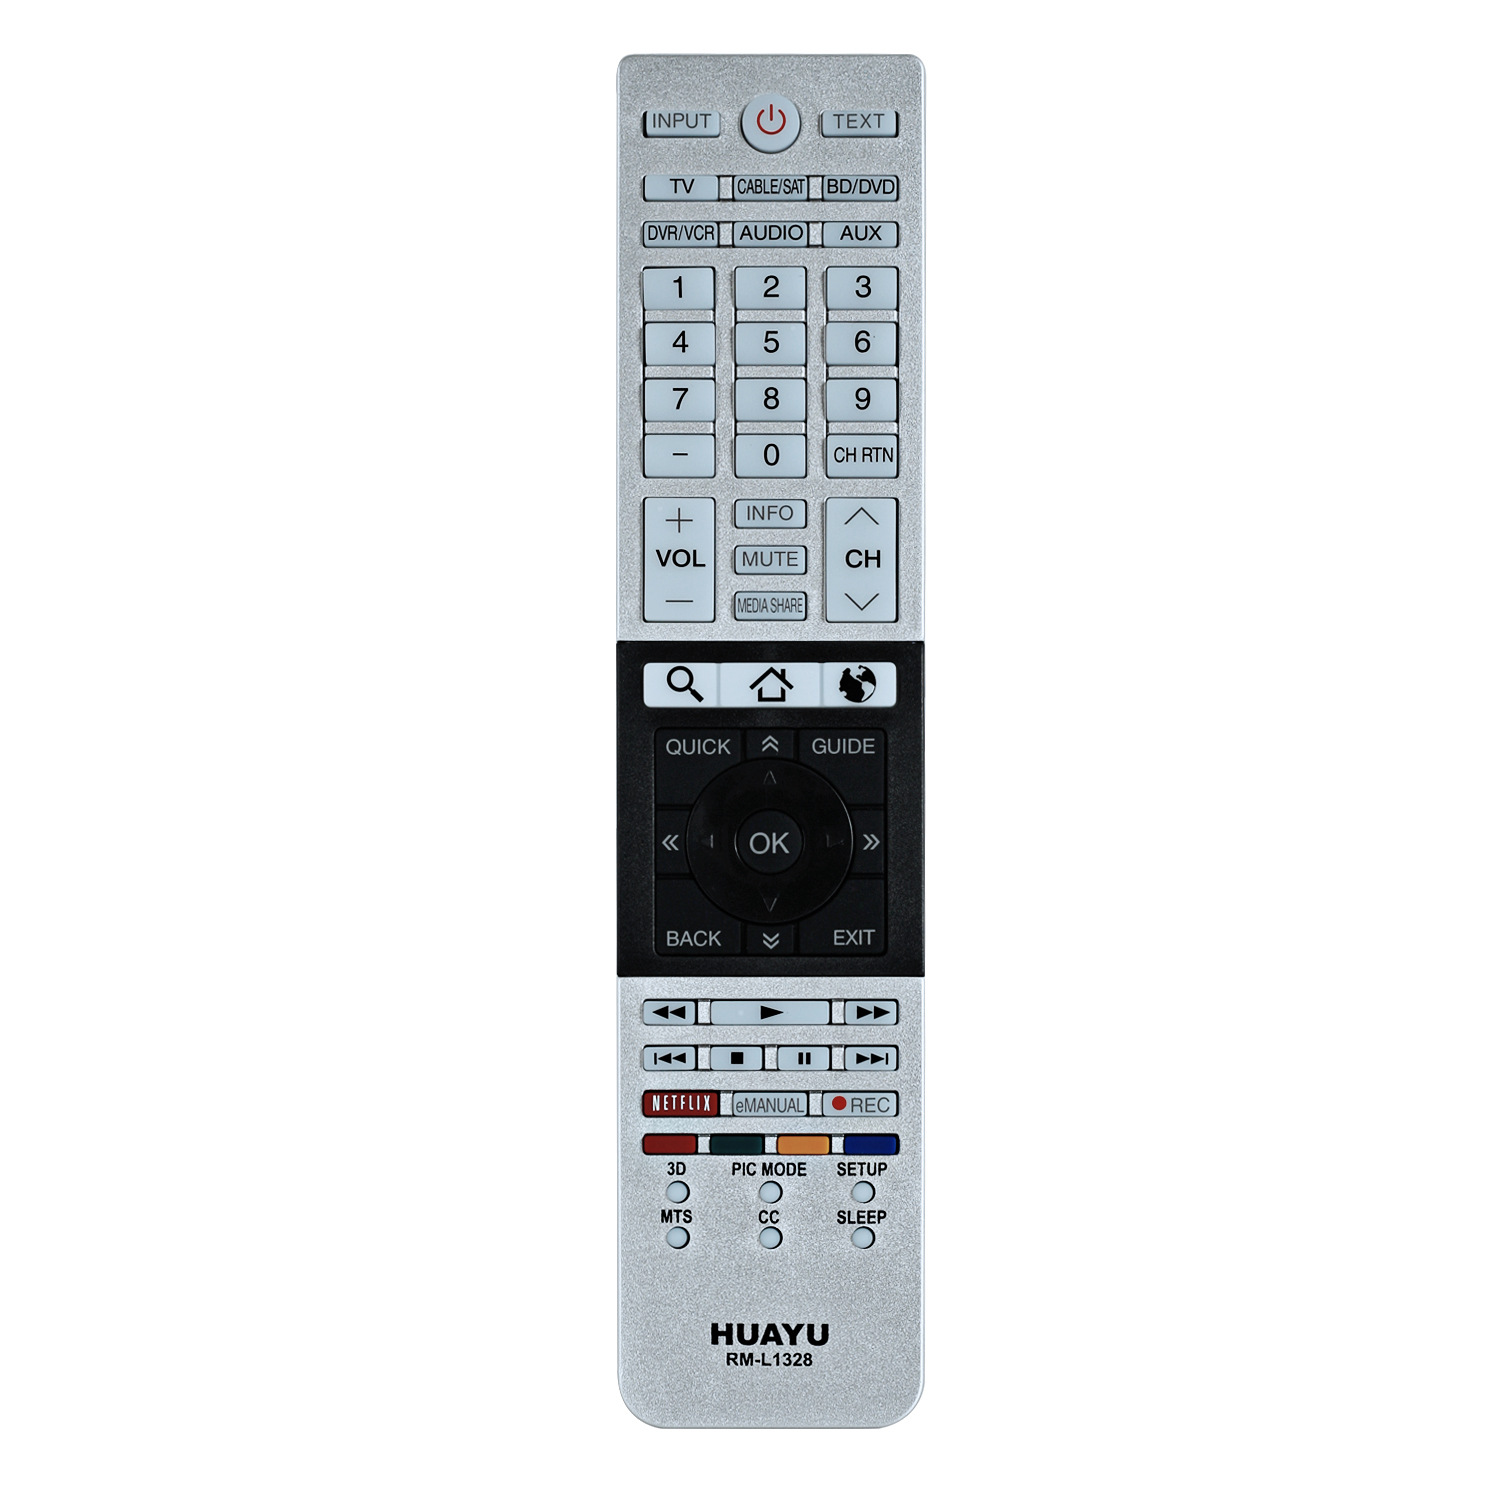 

HUAYU RM-L1328 TV Remote Control for Toshiba LCD SMART 3D TV CT-90296 CT-90429